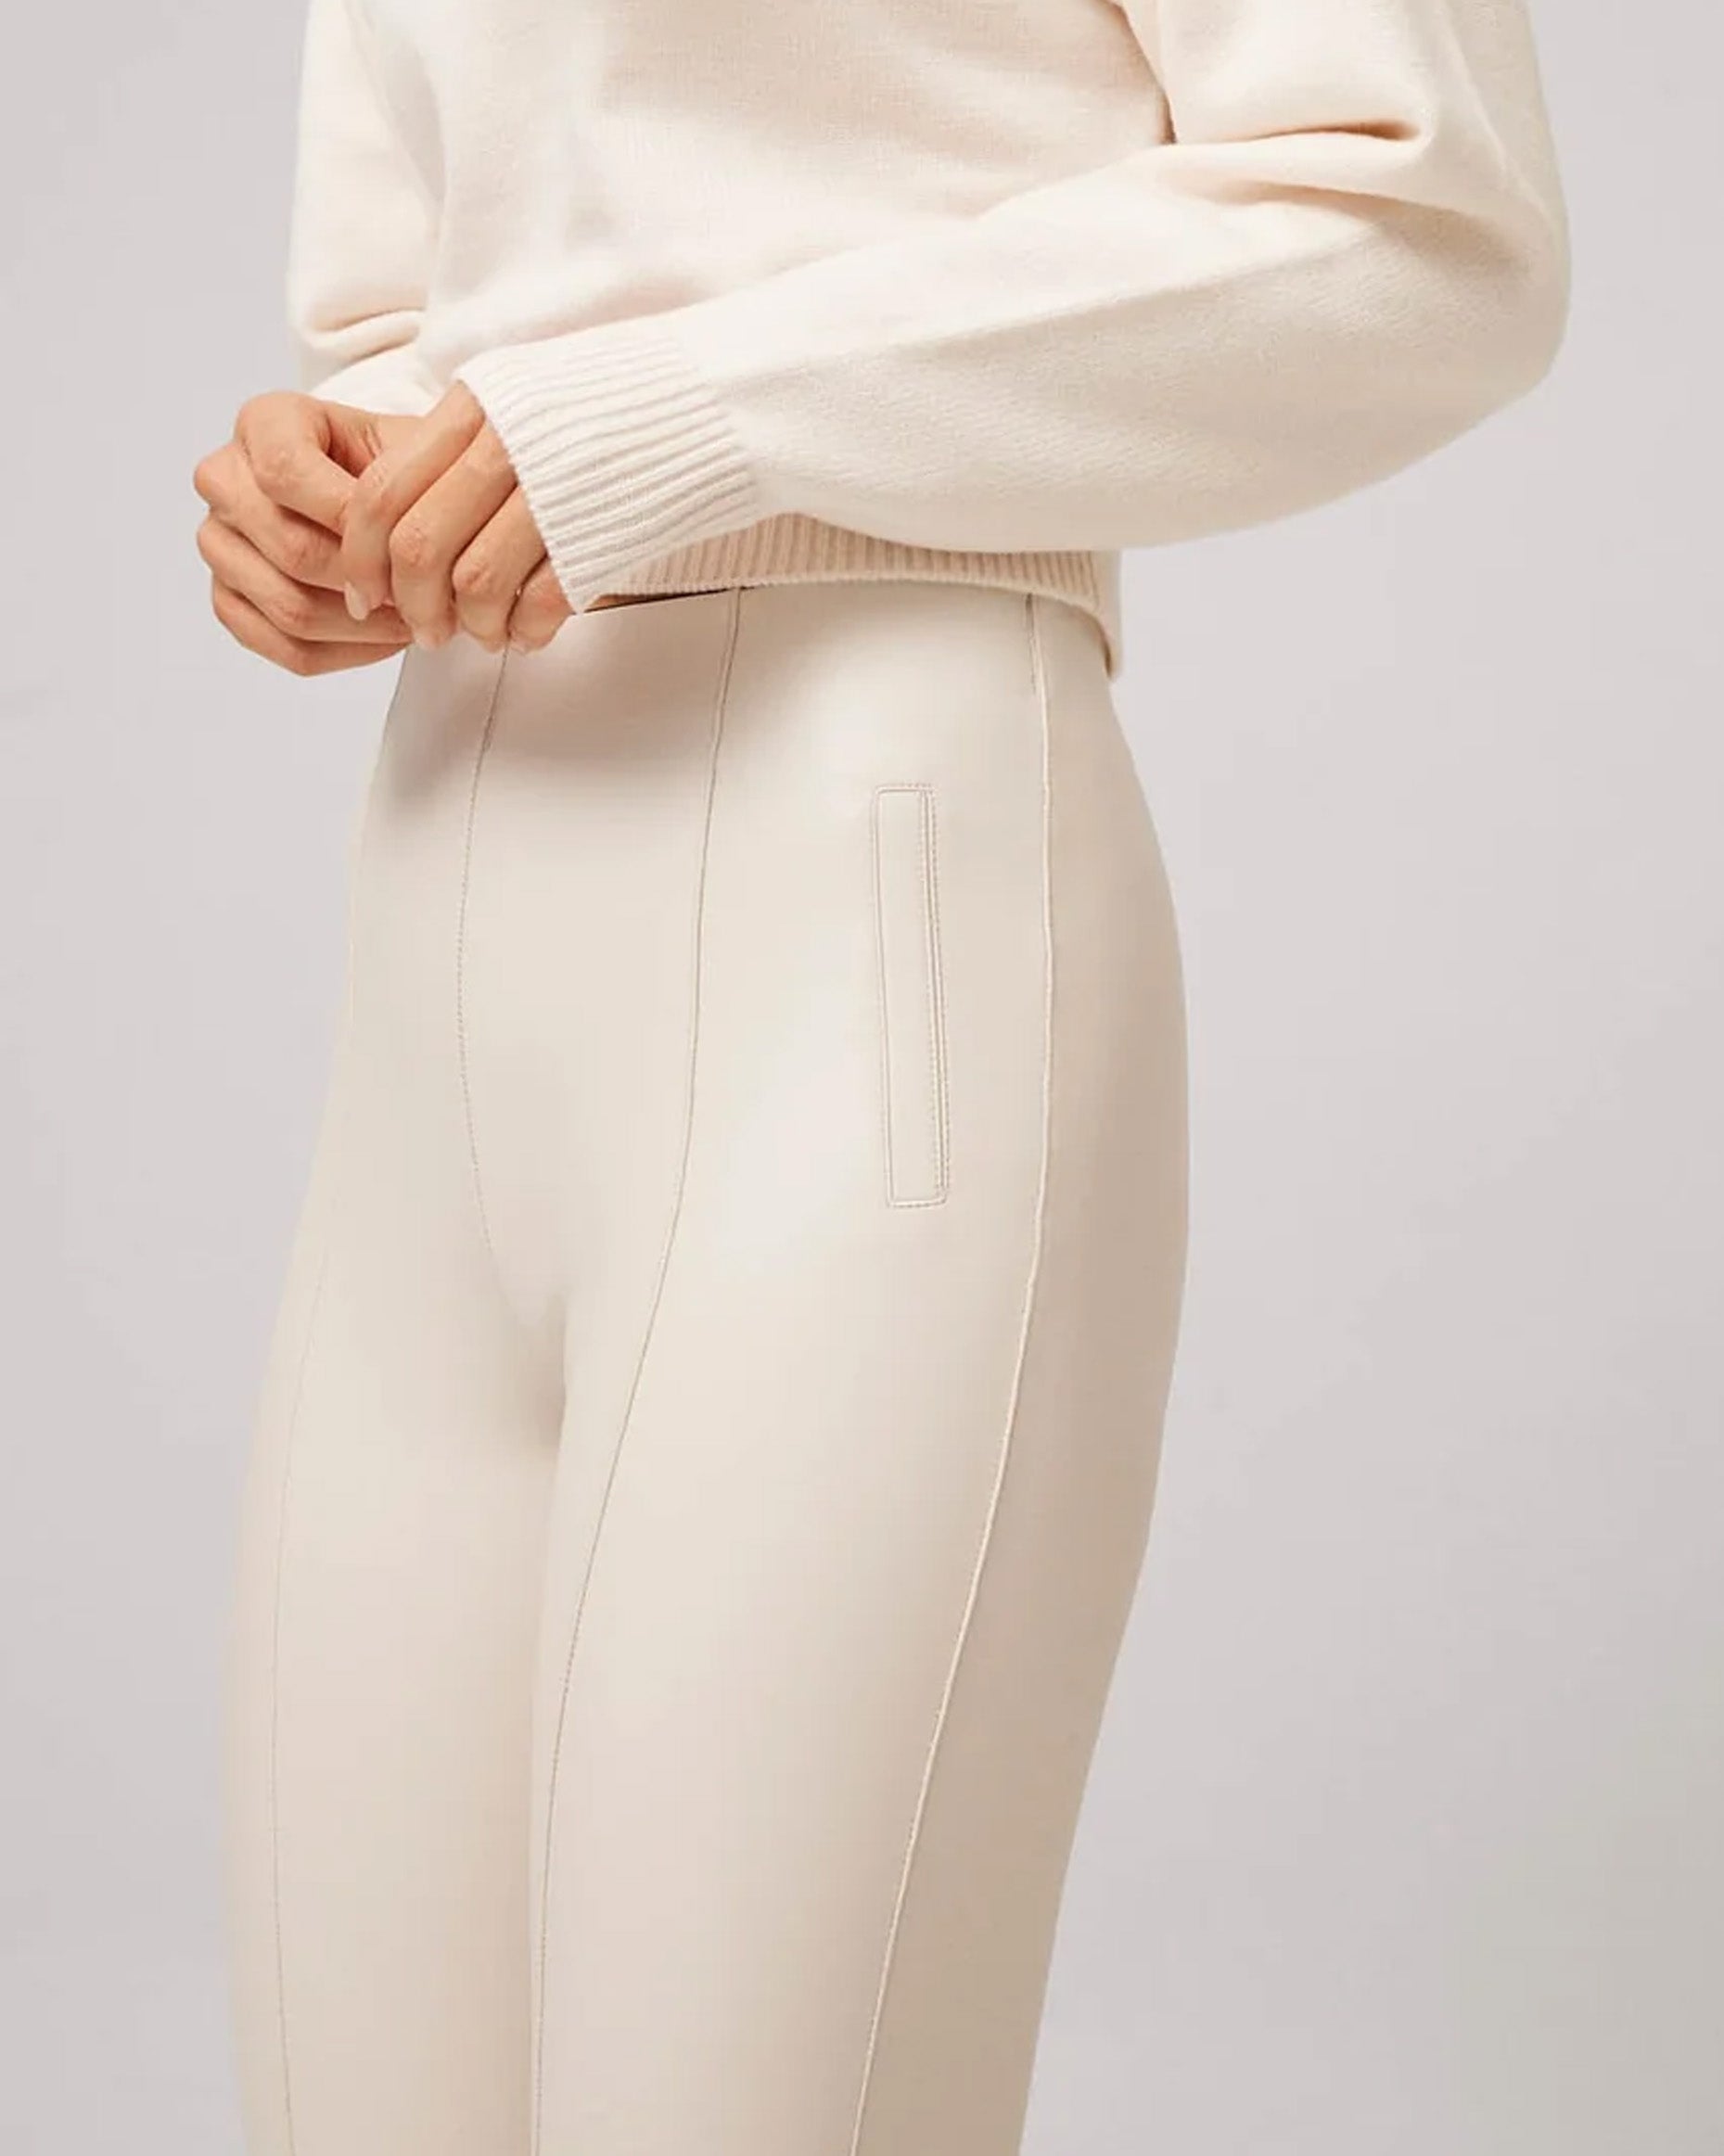 Ysabel Mora 70295 Faux Leather Slit Leggings - Tight fit faux leather thermal cream coloured leggings with a warm plush fleece lining, faux side pocket stitching, centre seam down the front.